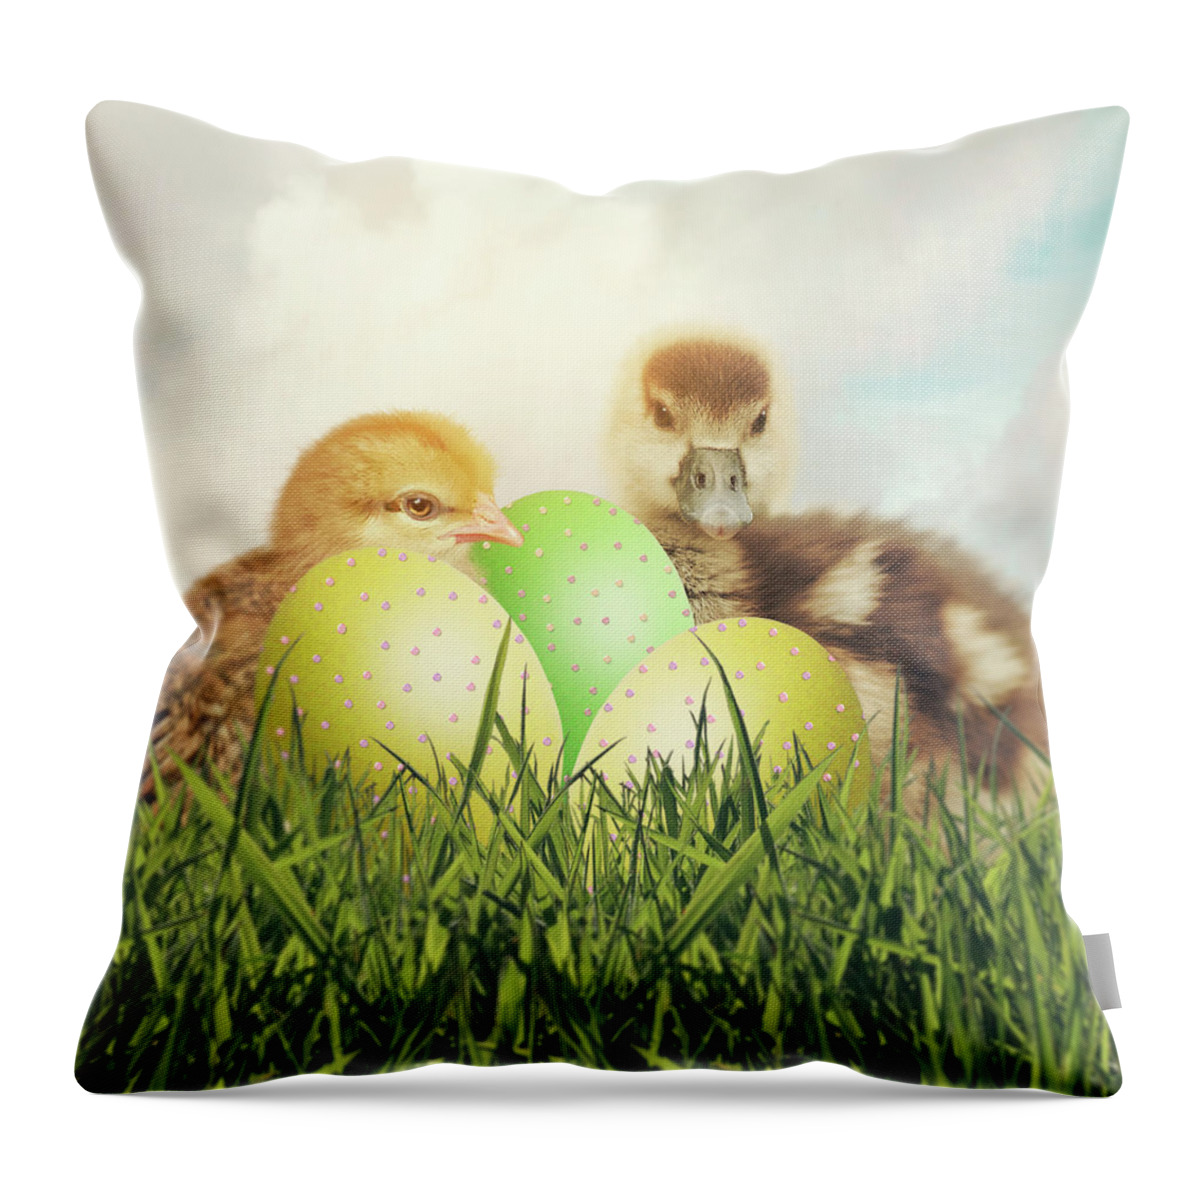 Easter Throw Pillow featuring the photograph Easter Chick And Duckling With Easter Eggs On A Bed Of Grass by Ethiriel Photography